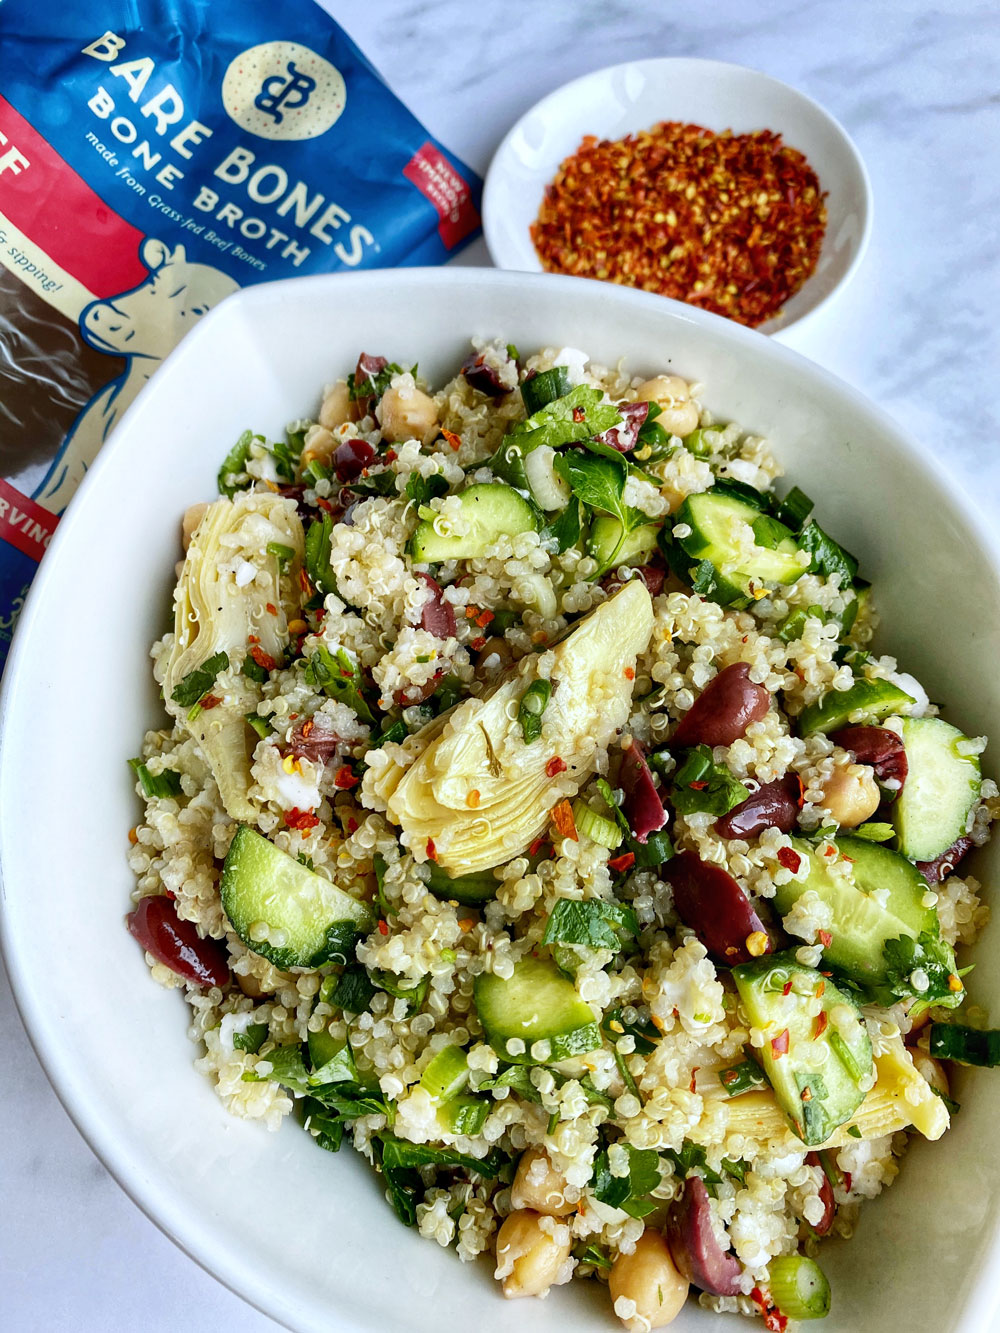 Quinoa Artichoke Salad Healthy With Nedihealthy With Nedi,Two Player Card Games